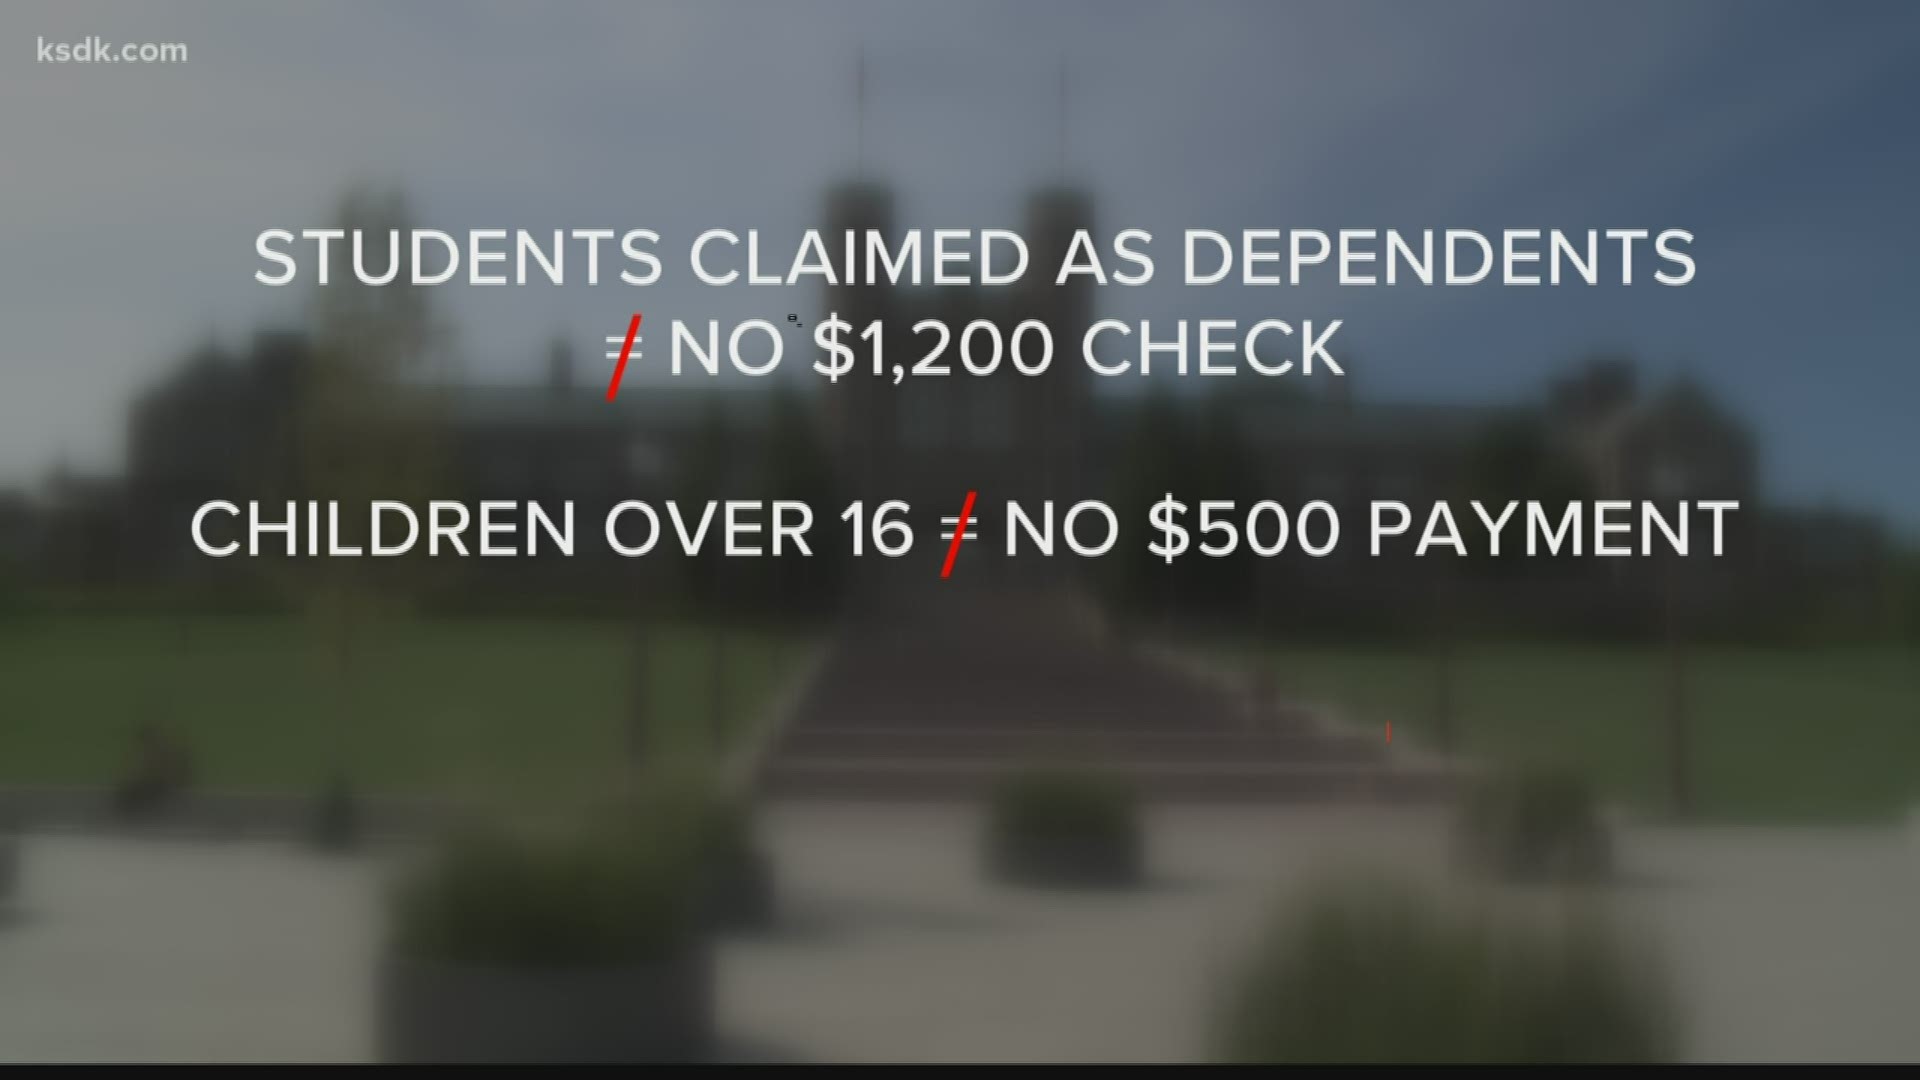 College students claimed as dependents on their parents' tax returns will not get the $1,200 stimulus check.